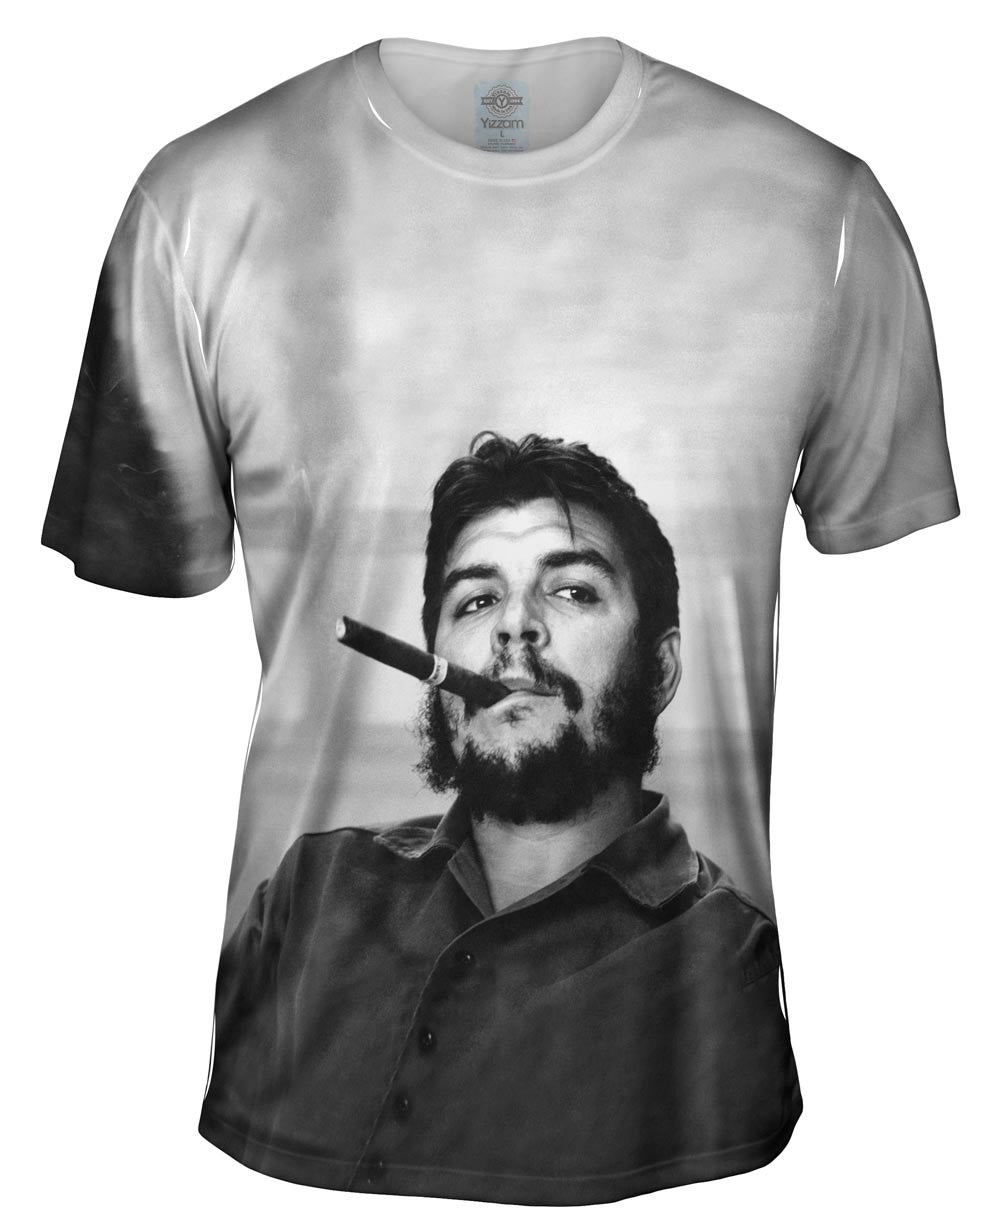 Why do people wear 'Che Guevara' T-shirts without knowing anything